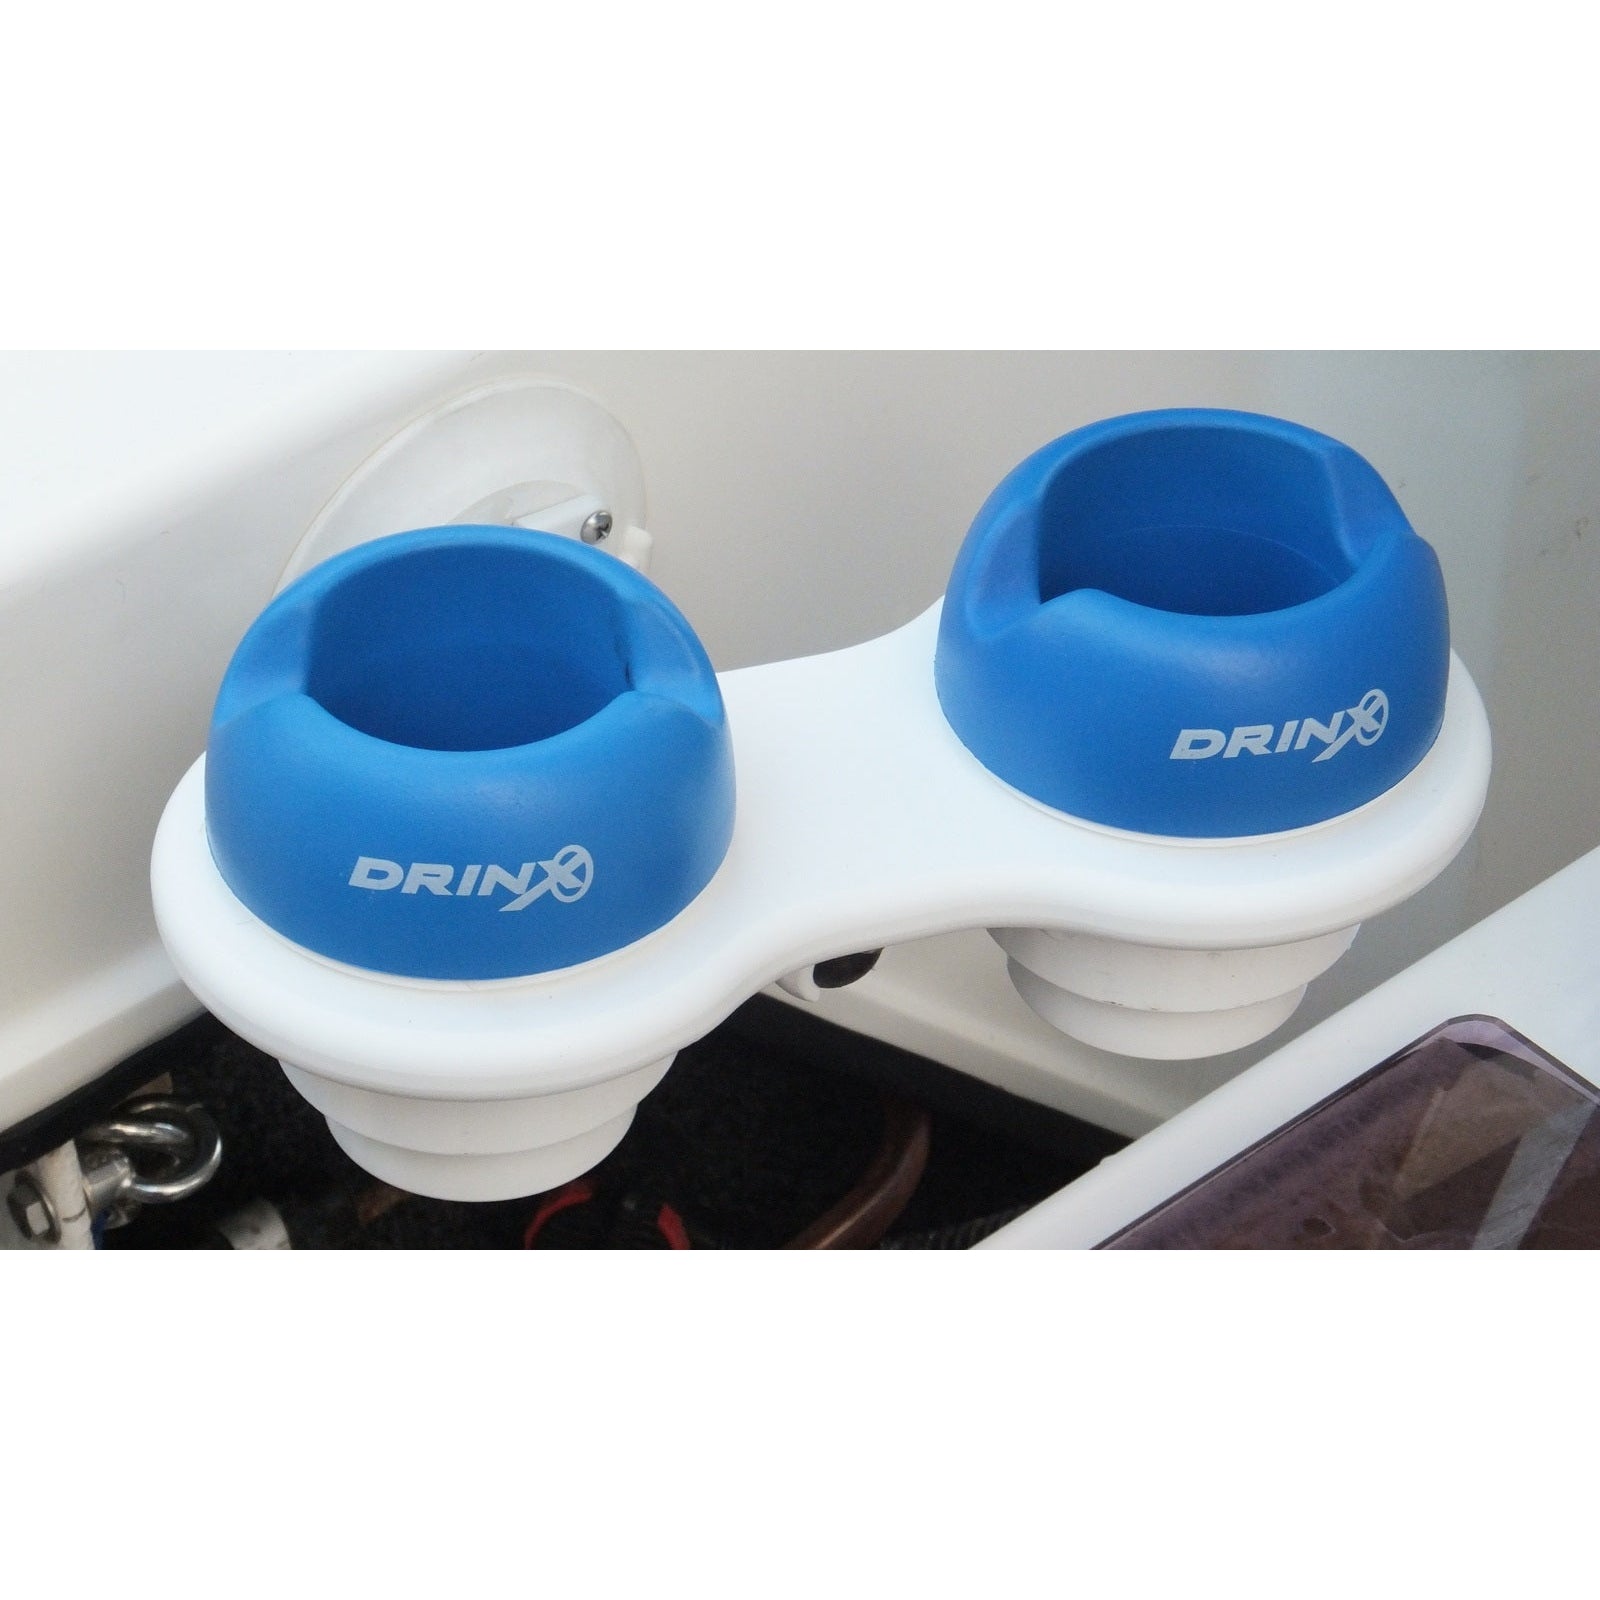 2 Cup Holder with Angle Mount